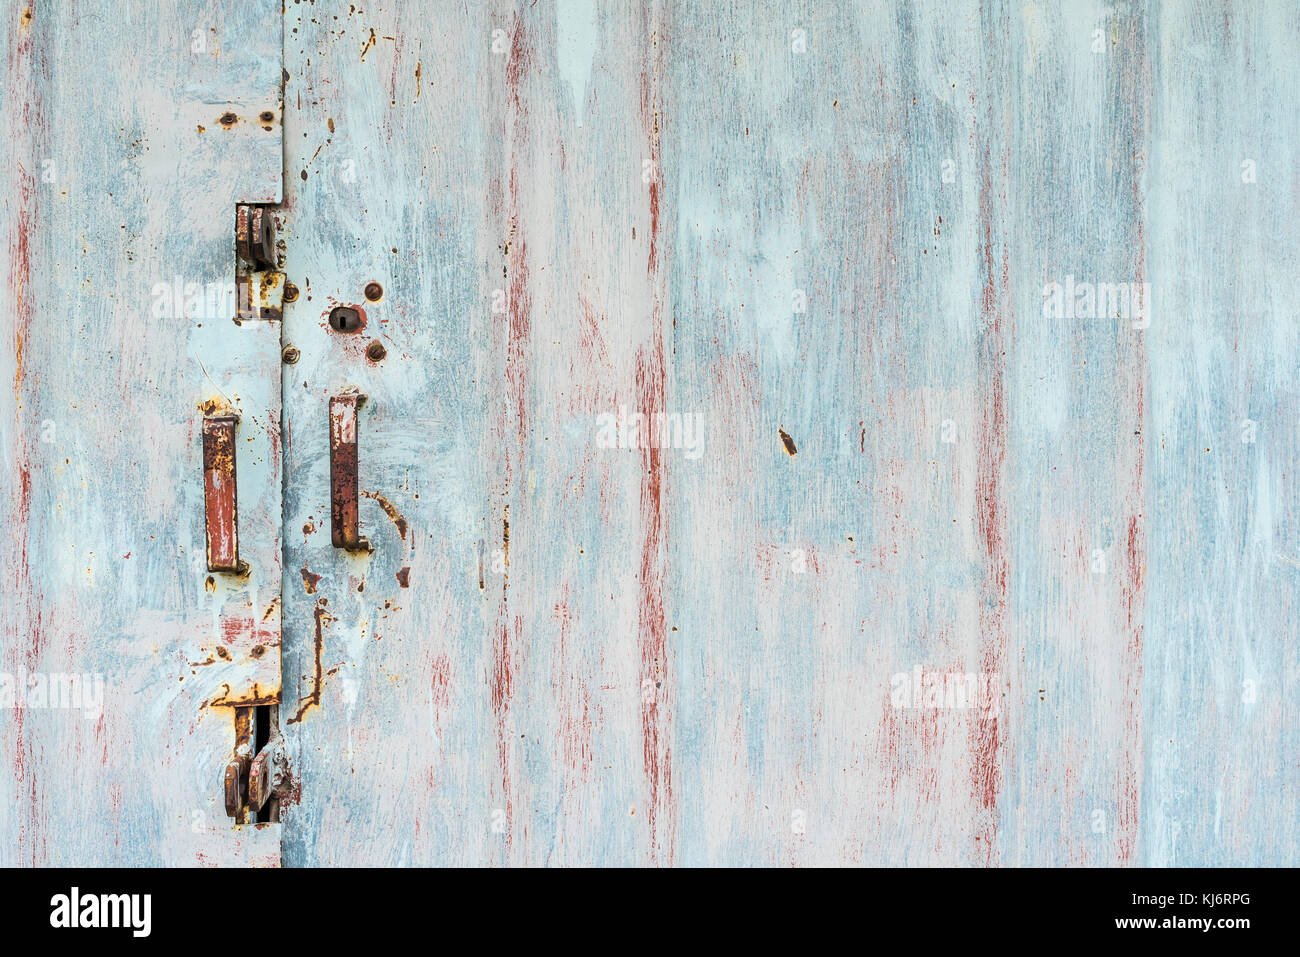 Closed metal door in front, grunge, space for text Stock Photo